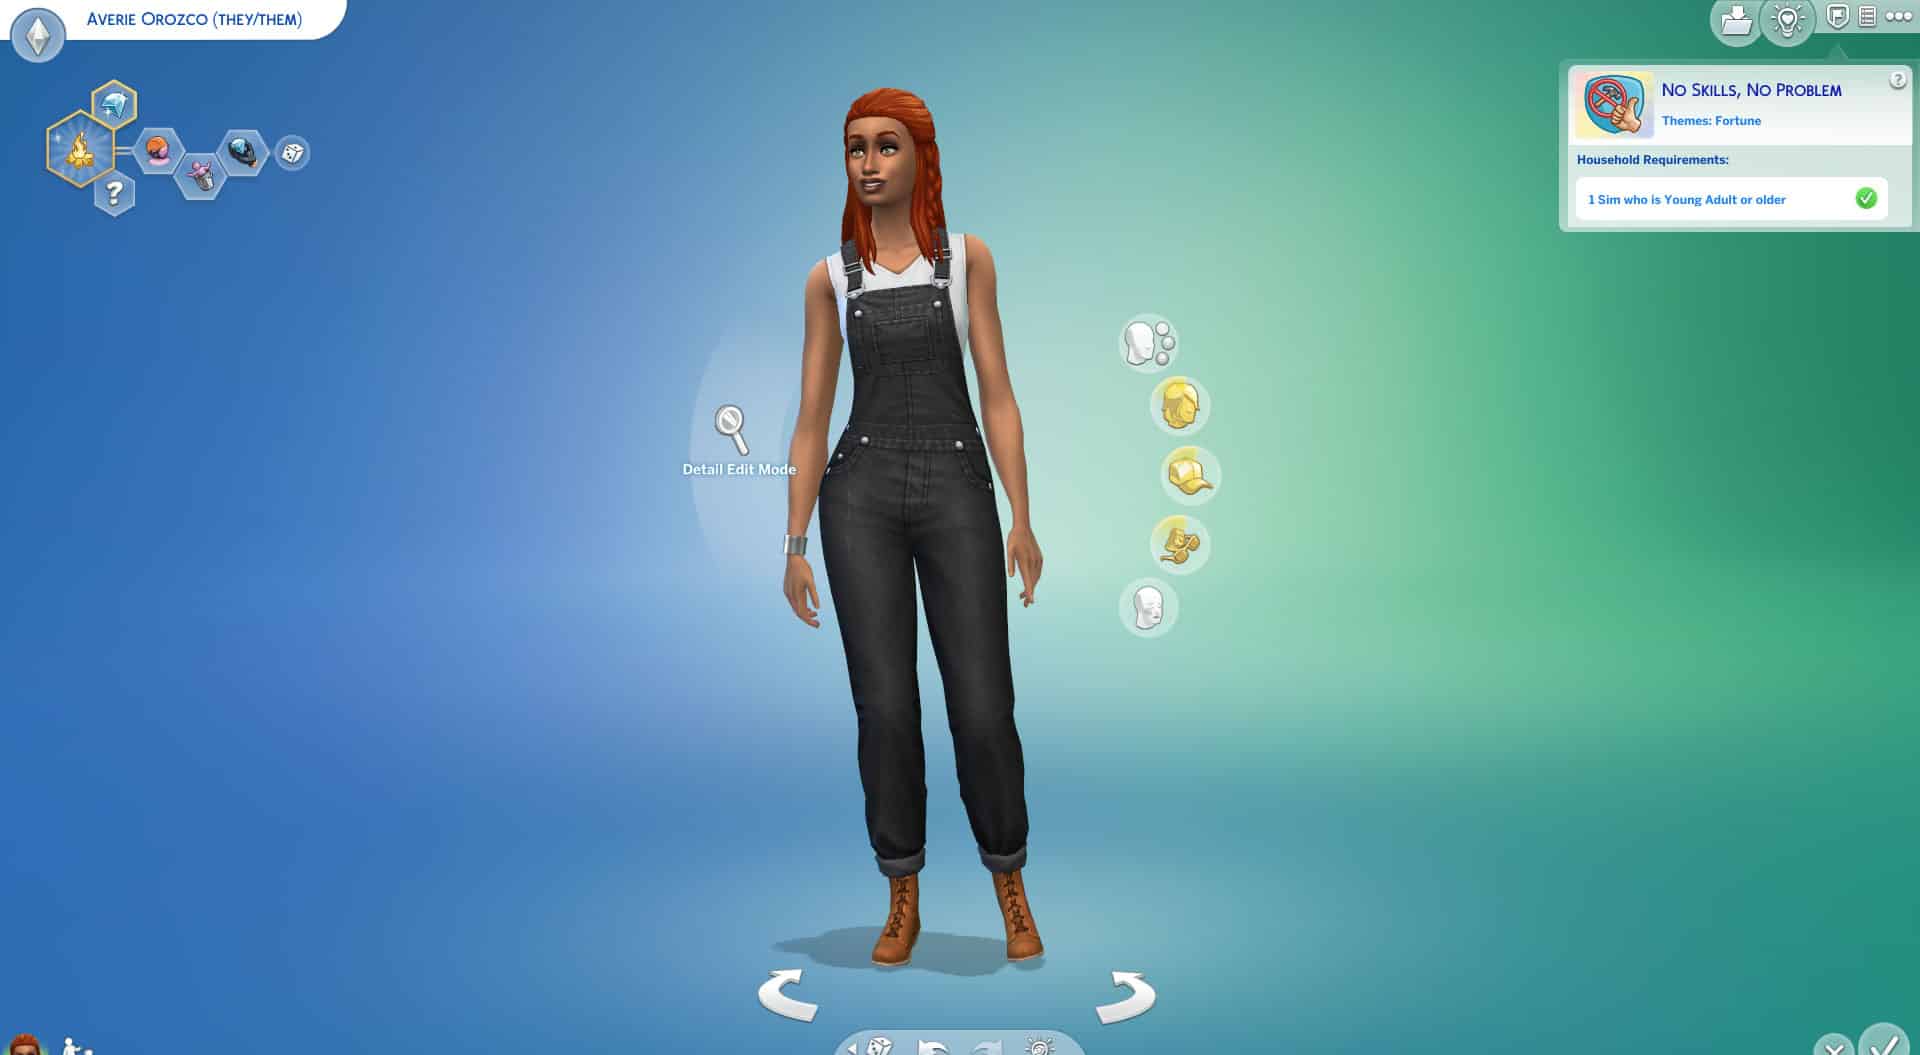 the sims 4 create a sim page adding traits to sims for the no skills no problem scenario